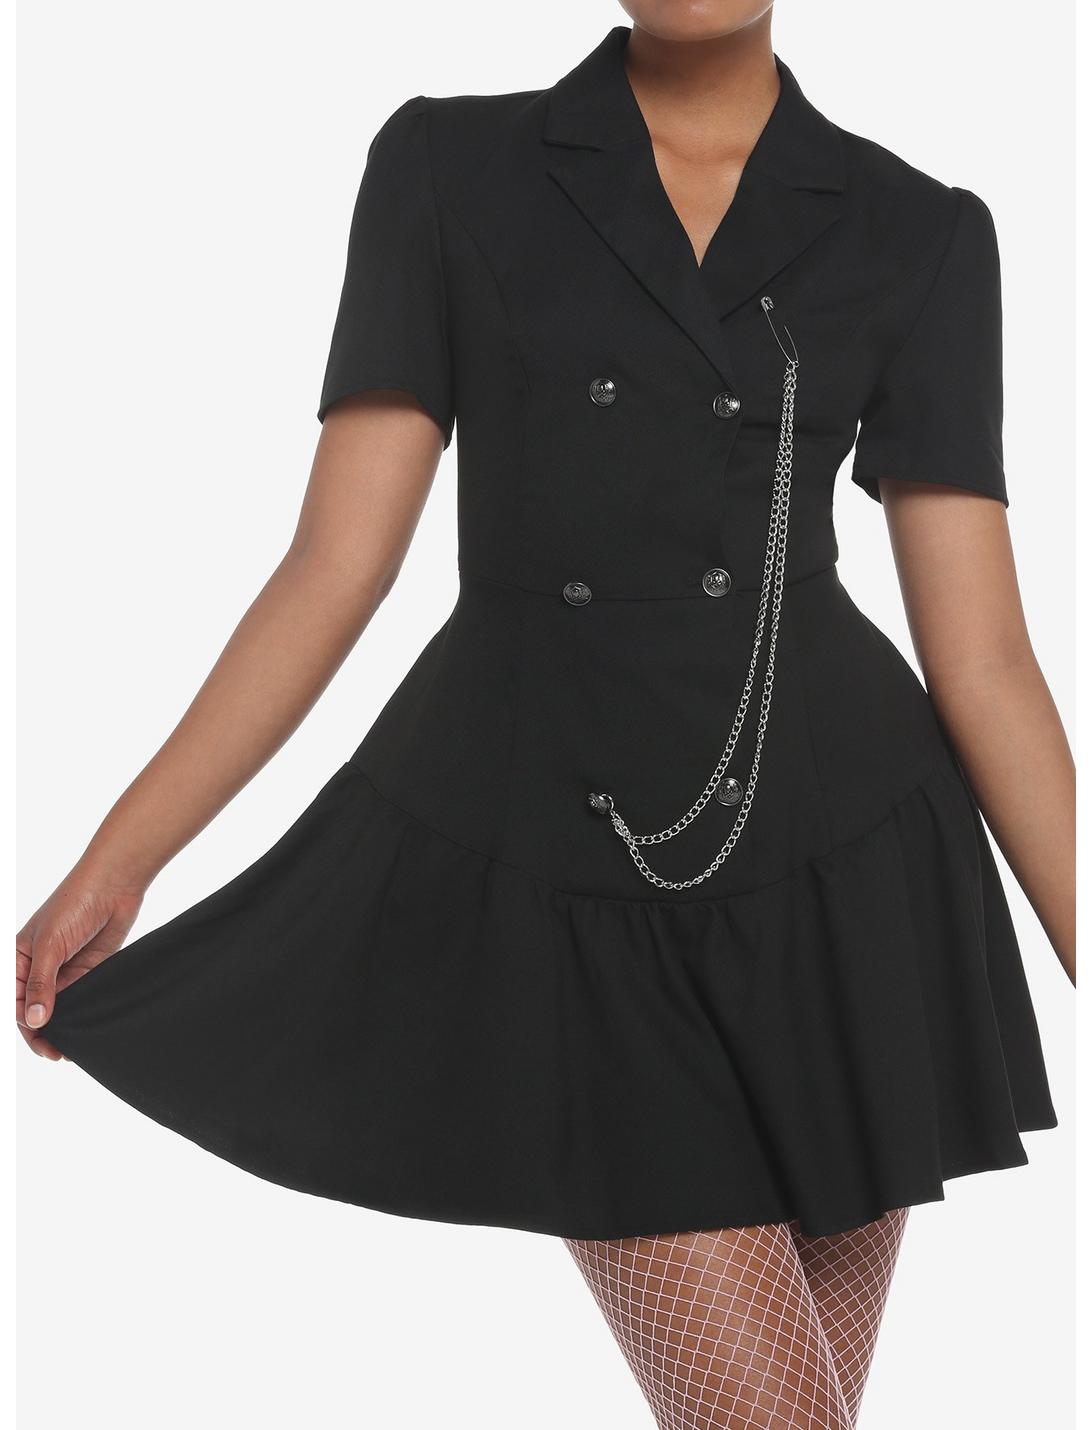 Hardware Chain Double-Breasted Blazer Dress, BLACK, hi-res